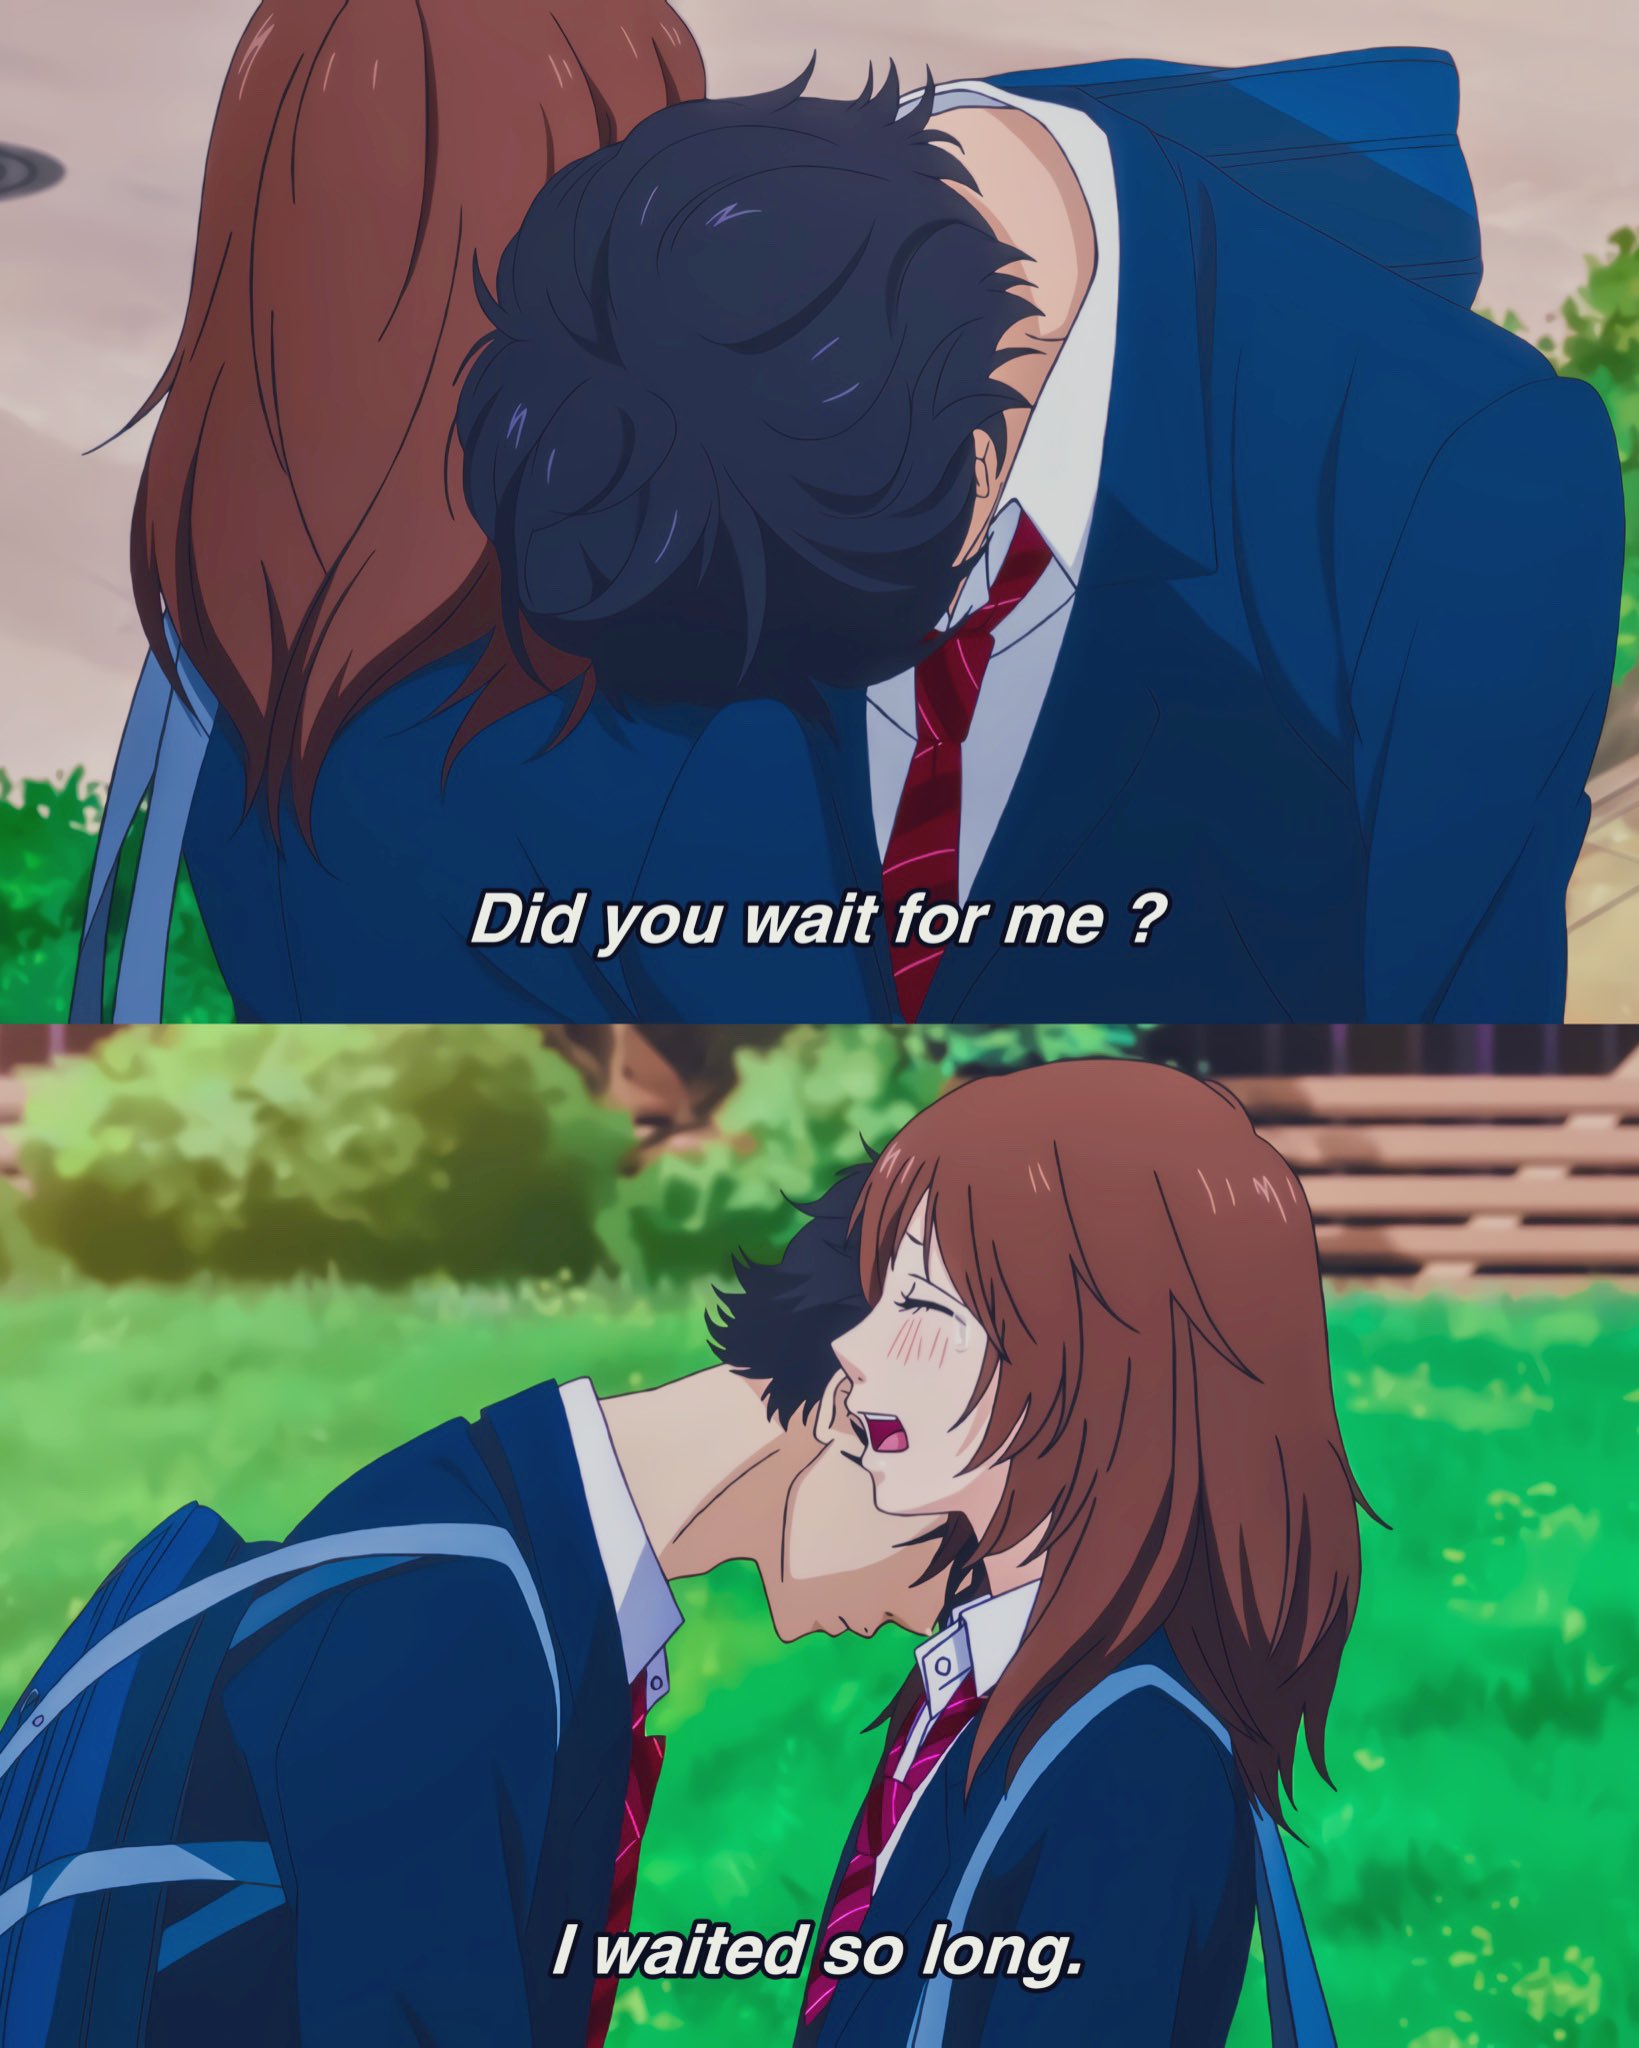 Ao Haru Ride: The Distance Between Me & You – Just Something About LynLyn